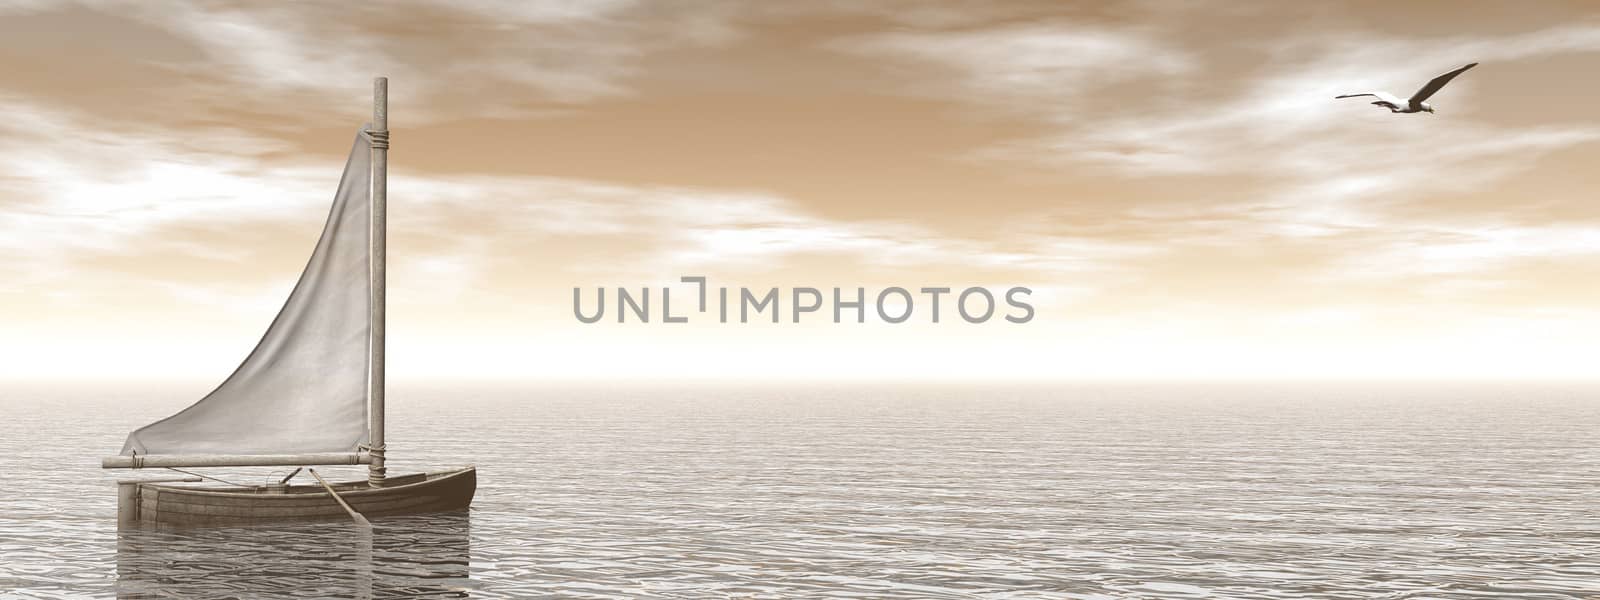 Small sailing boat on the ocean - 3D render by Elenaphotos21